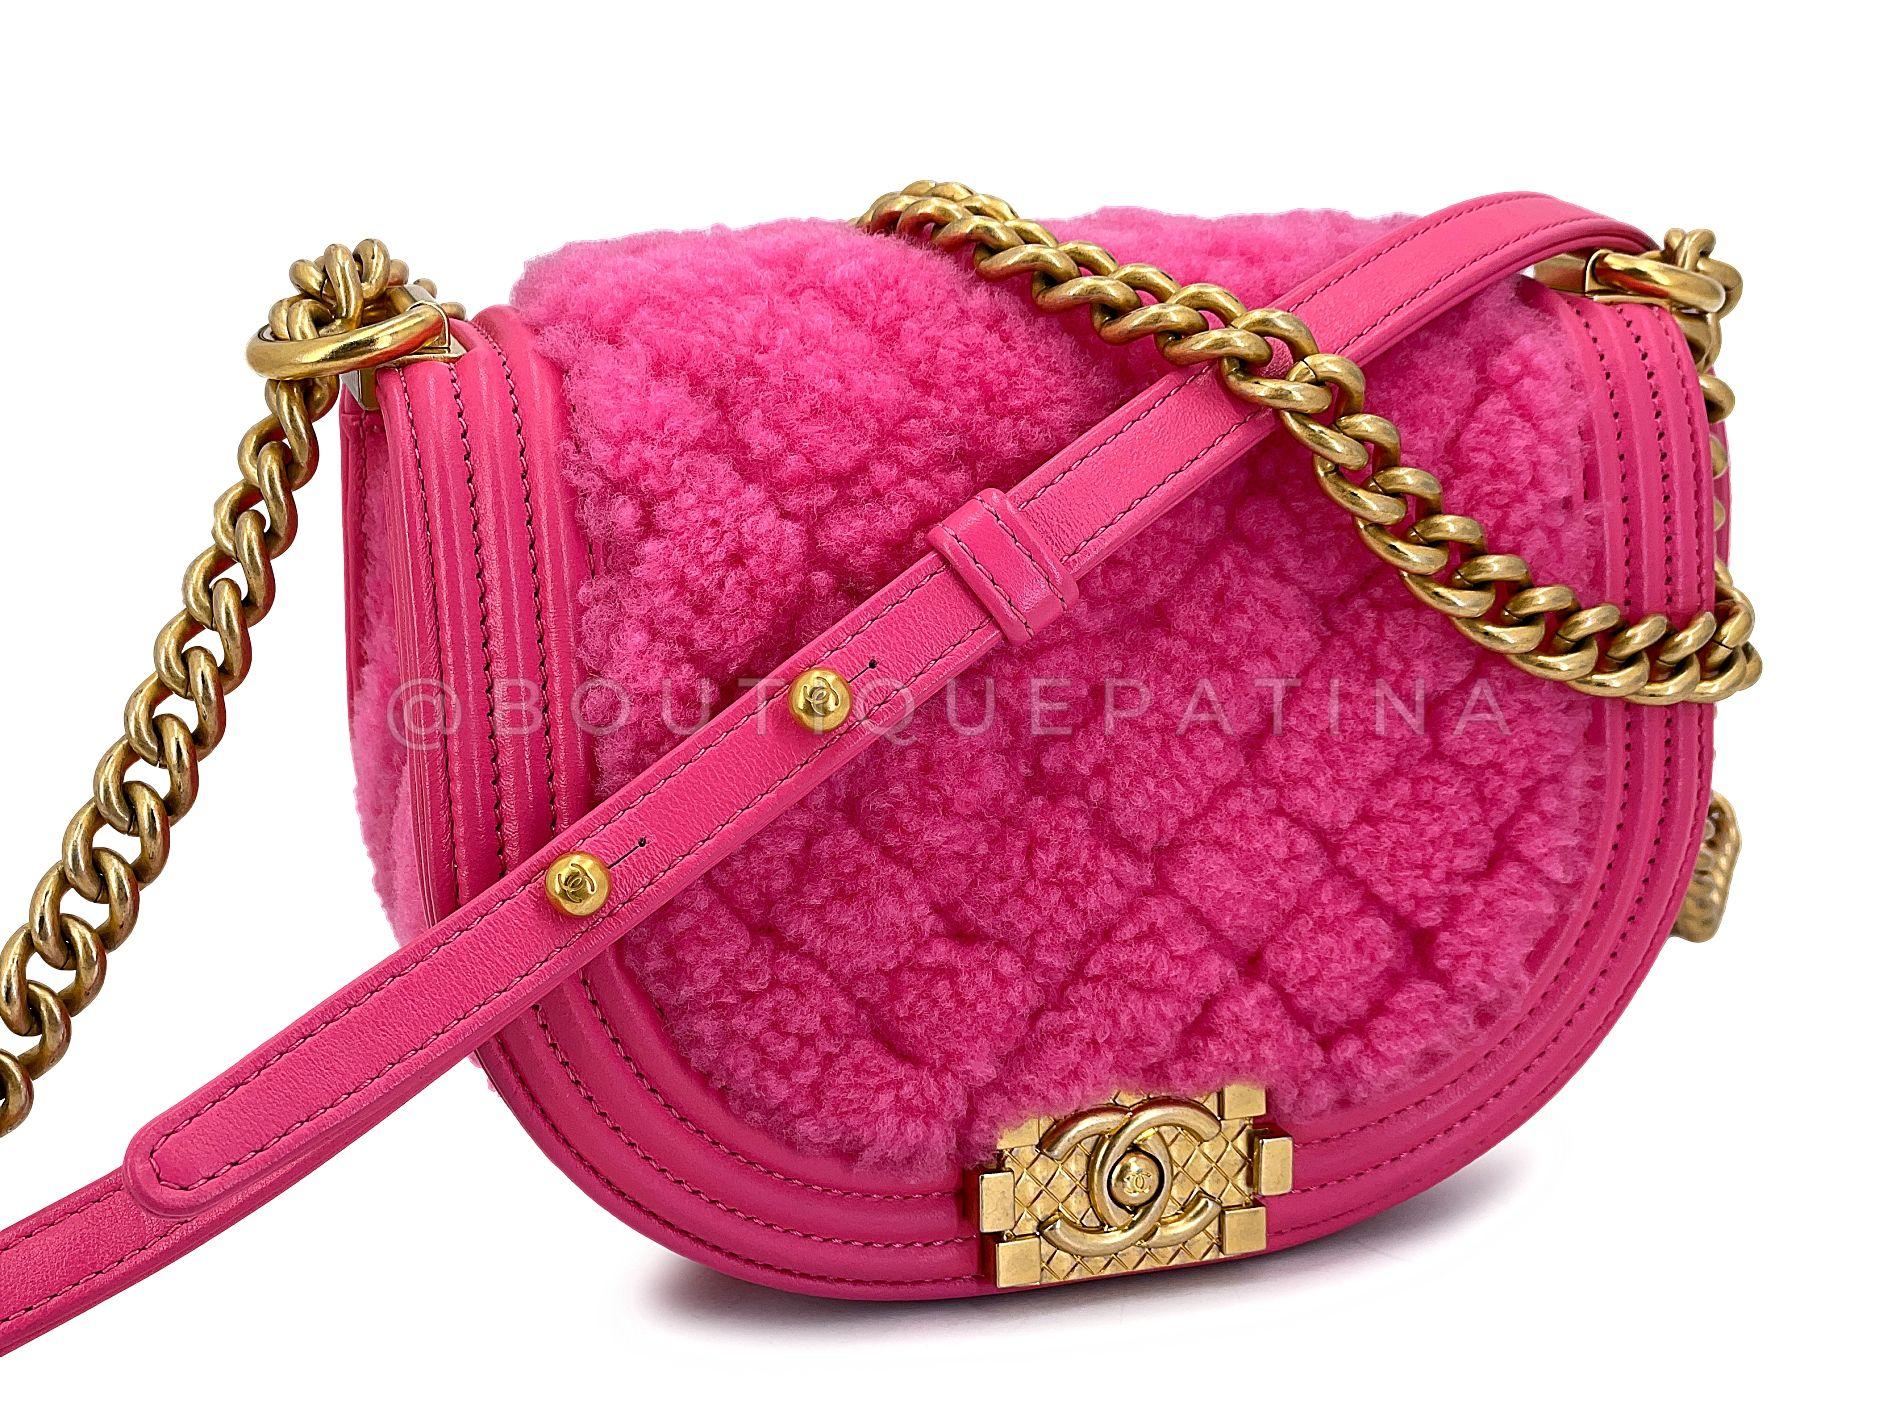 Store item: 67885
This Chanel Fuchsia Pink Shearling Round Boy Flap Bag GHW is super whimsical and yummy with a fuchsia pink shearling fur that is cozy and chic at the same time.

In Pink shearling and brushed gold hardware. A feminine twist on the